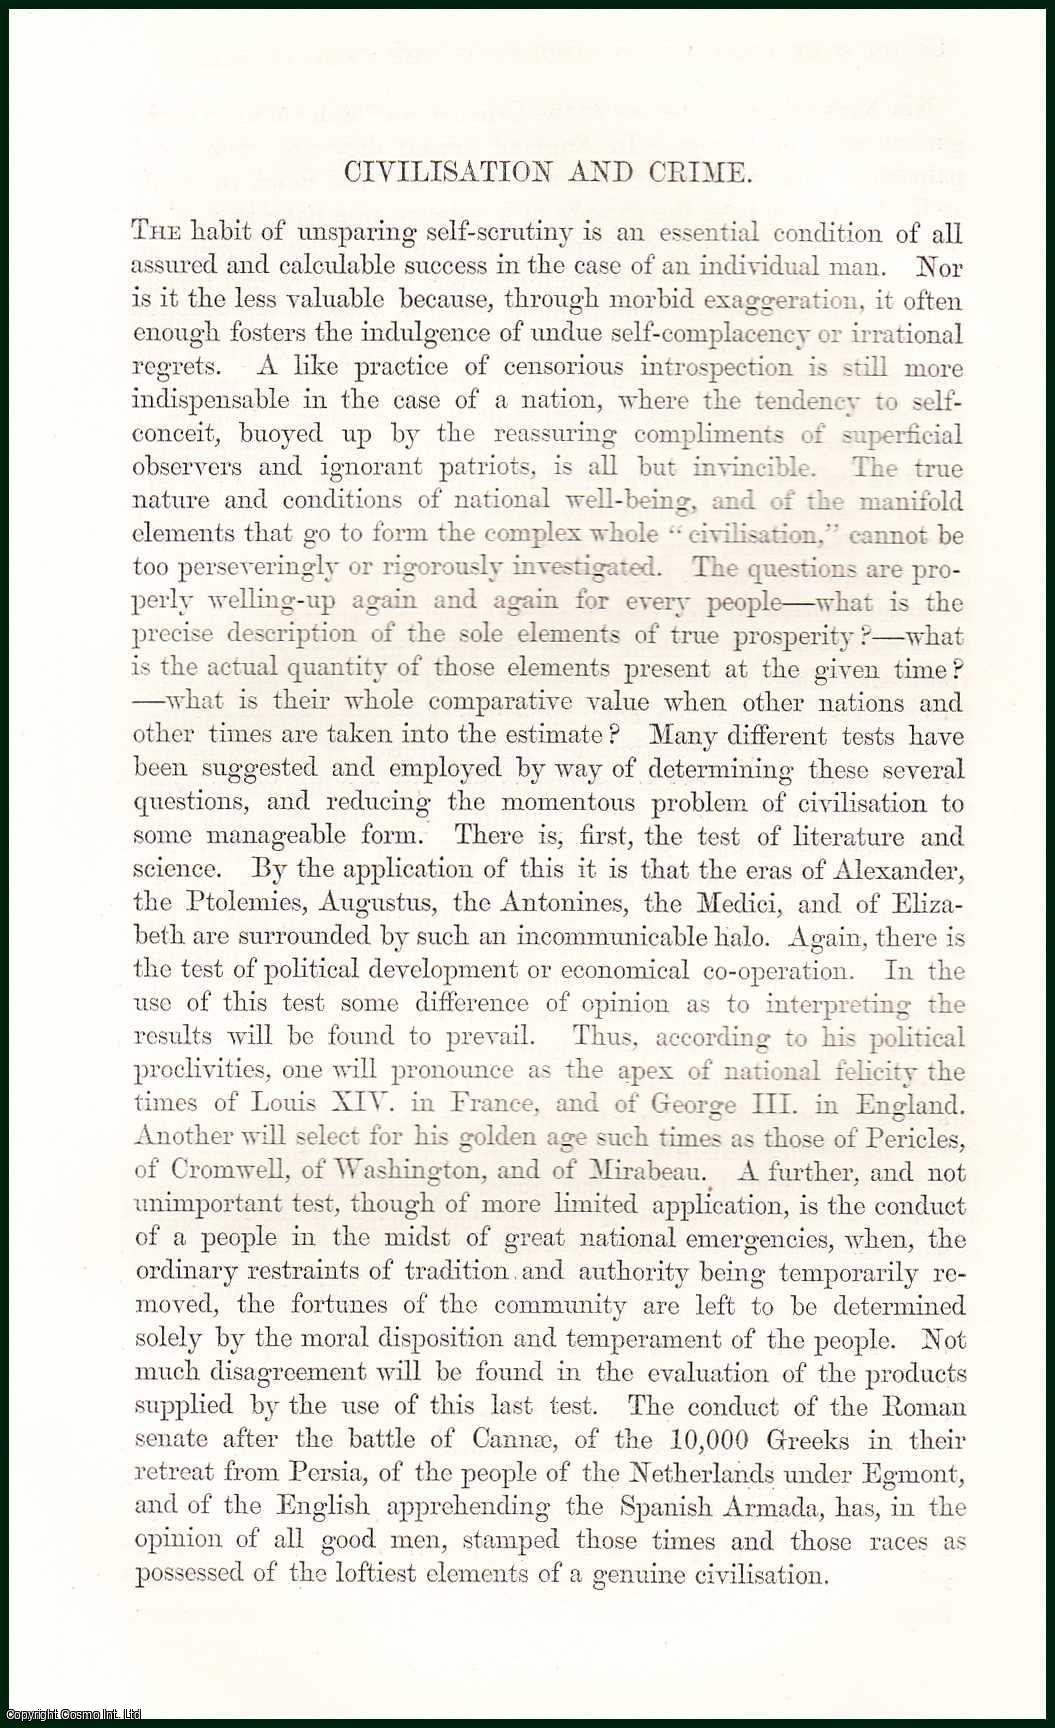 Sheldon Amos - Civilisation & Crime. An uncommon original article from The Fortnightly Review, 1865.